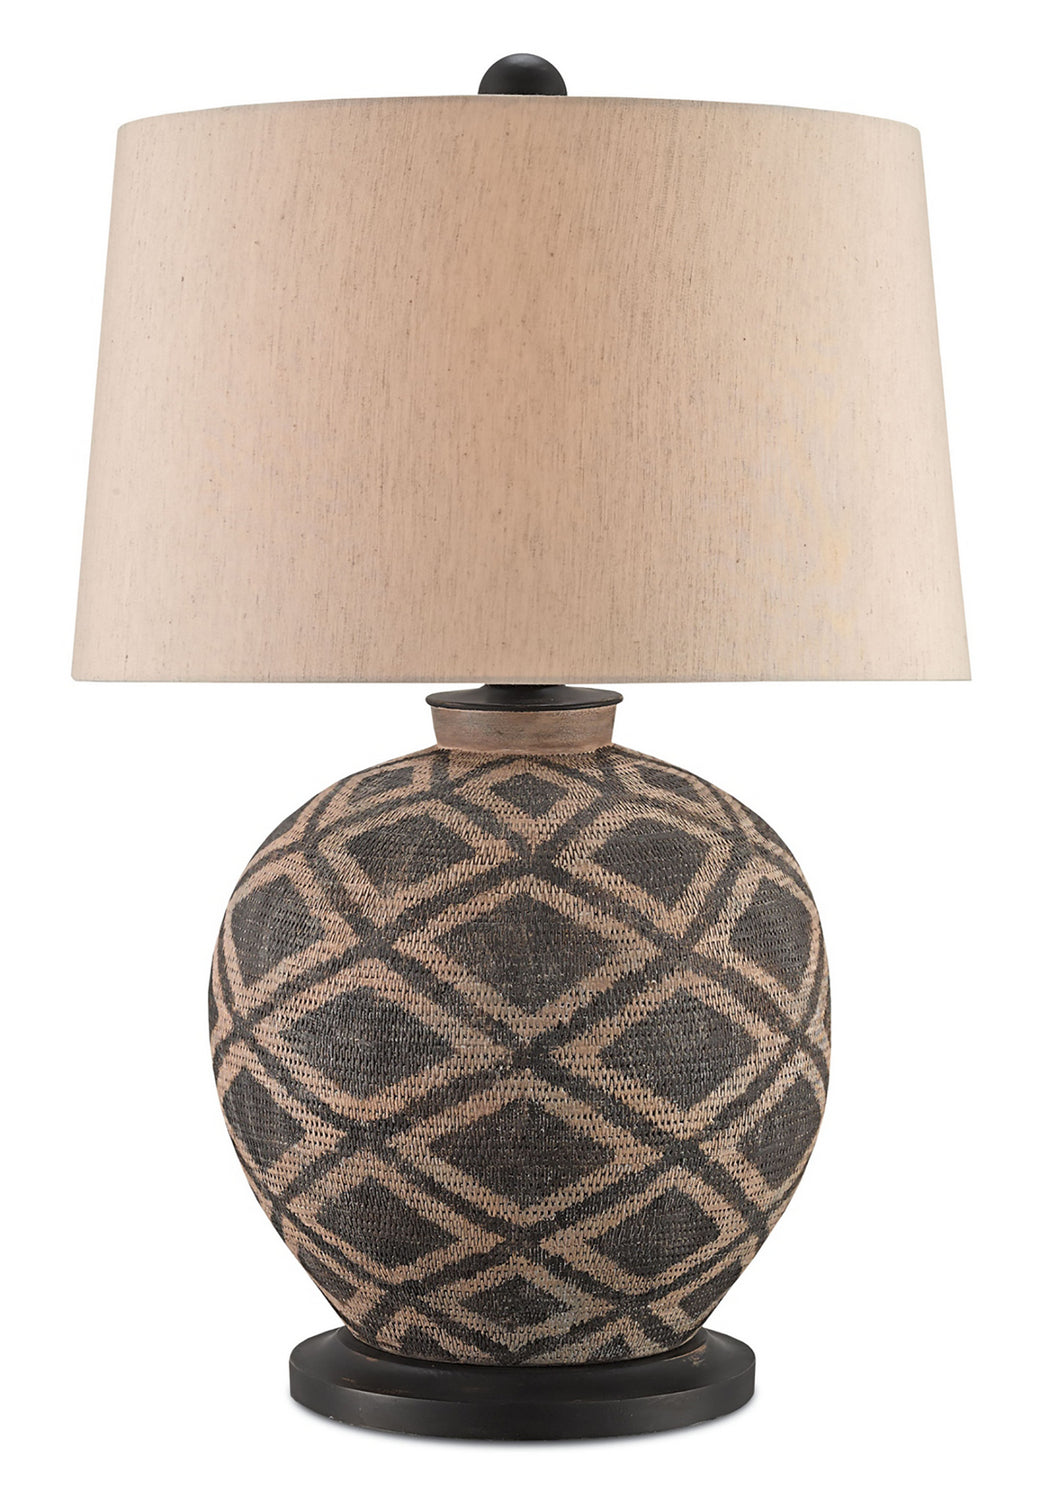 Currey and Company - One Light Table Lamp - Afrikan - Black/Tan/Distressed Black- Union Lighting Luminaires Decor